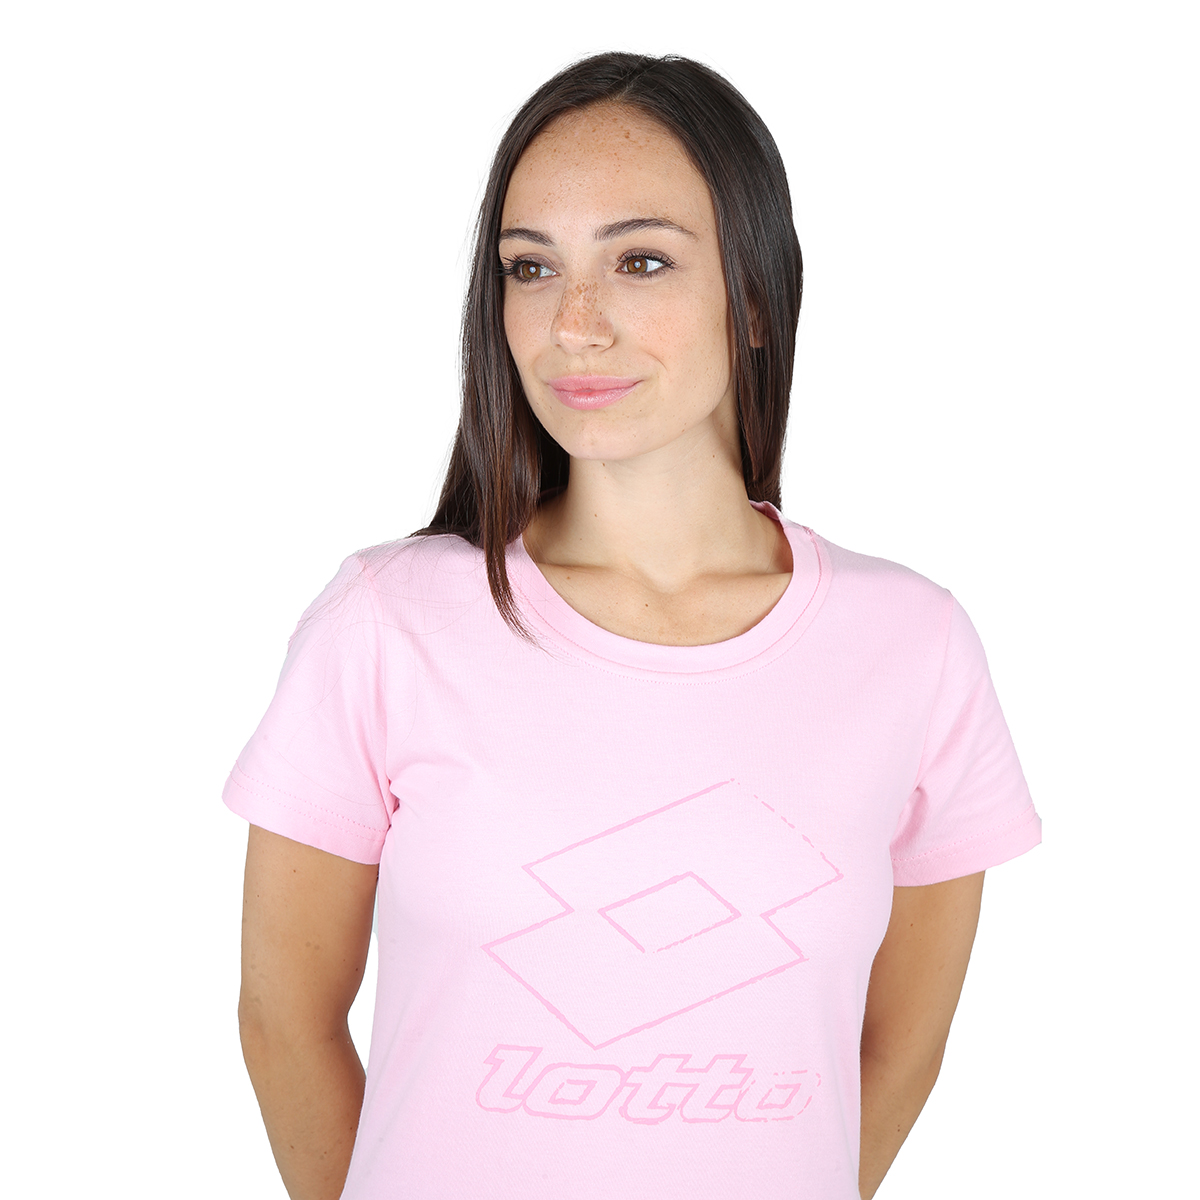 Remera Urbana Lotto Smart Mujer,  image number null